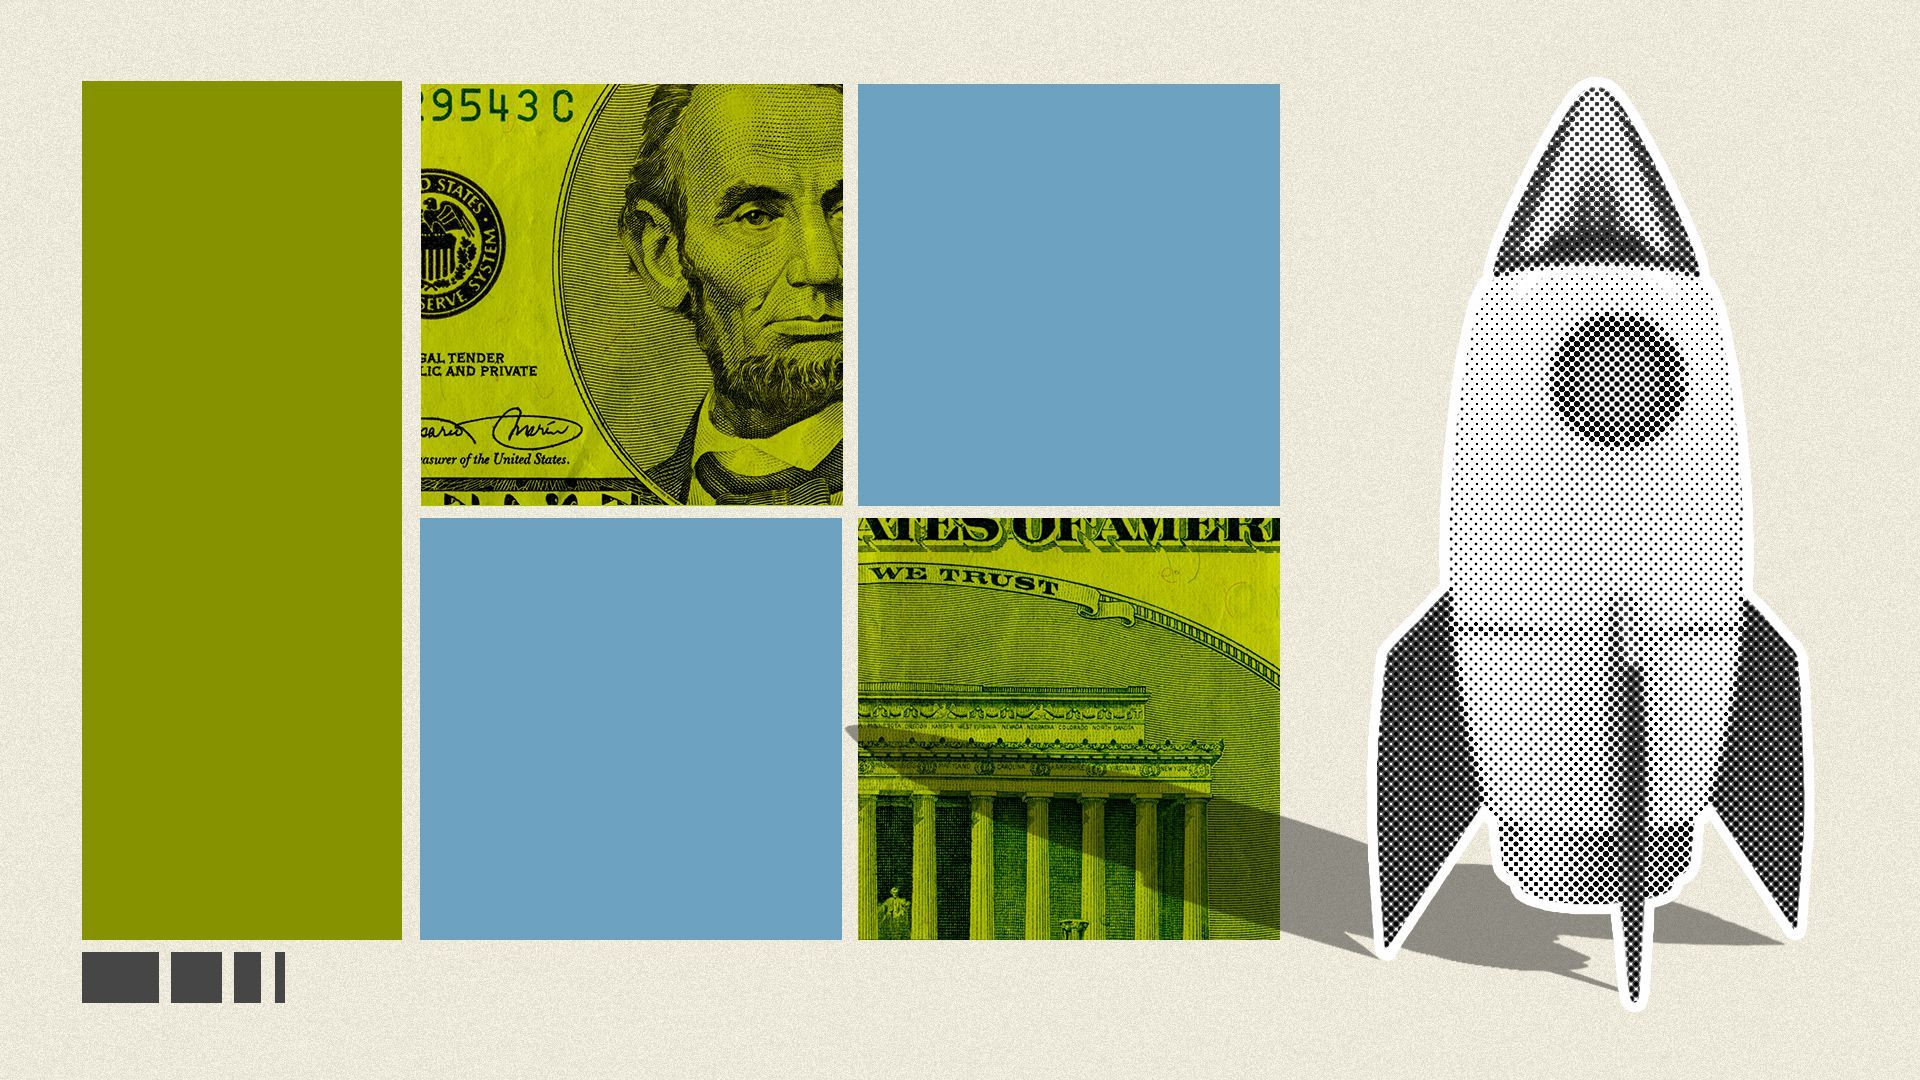 Illustrated collage of a rocket, money, and squares.